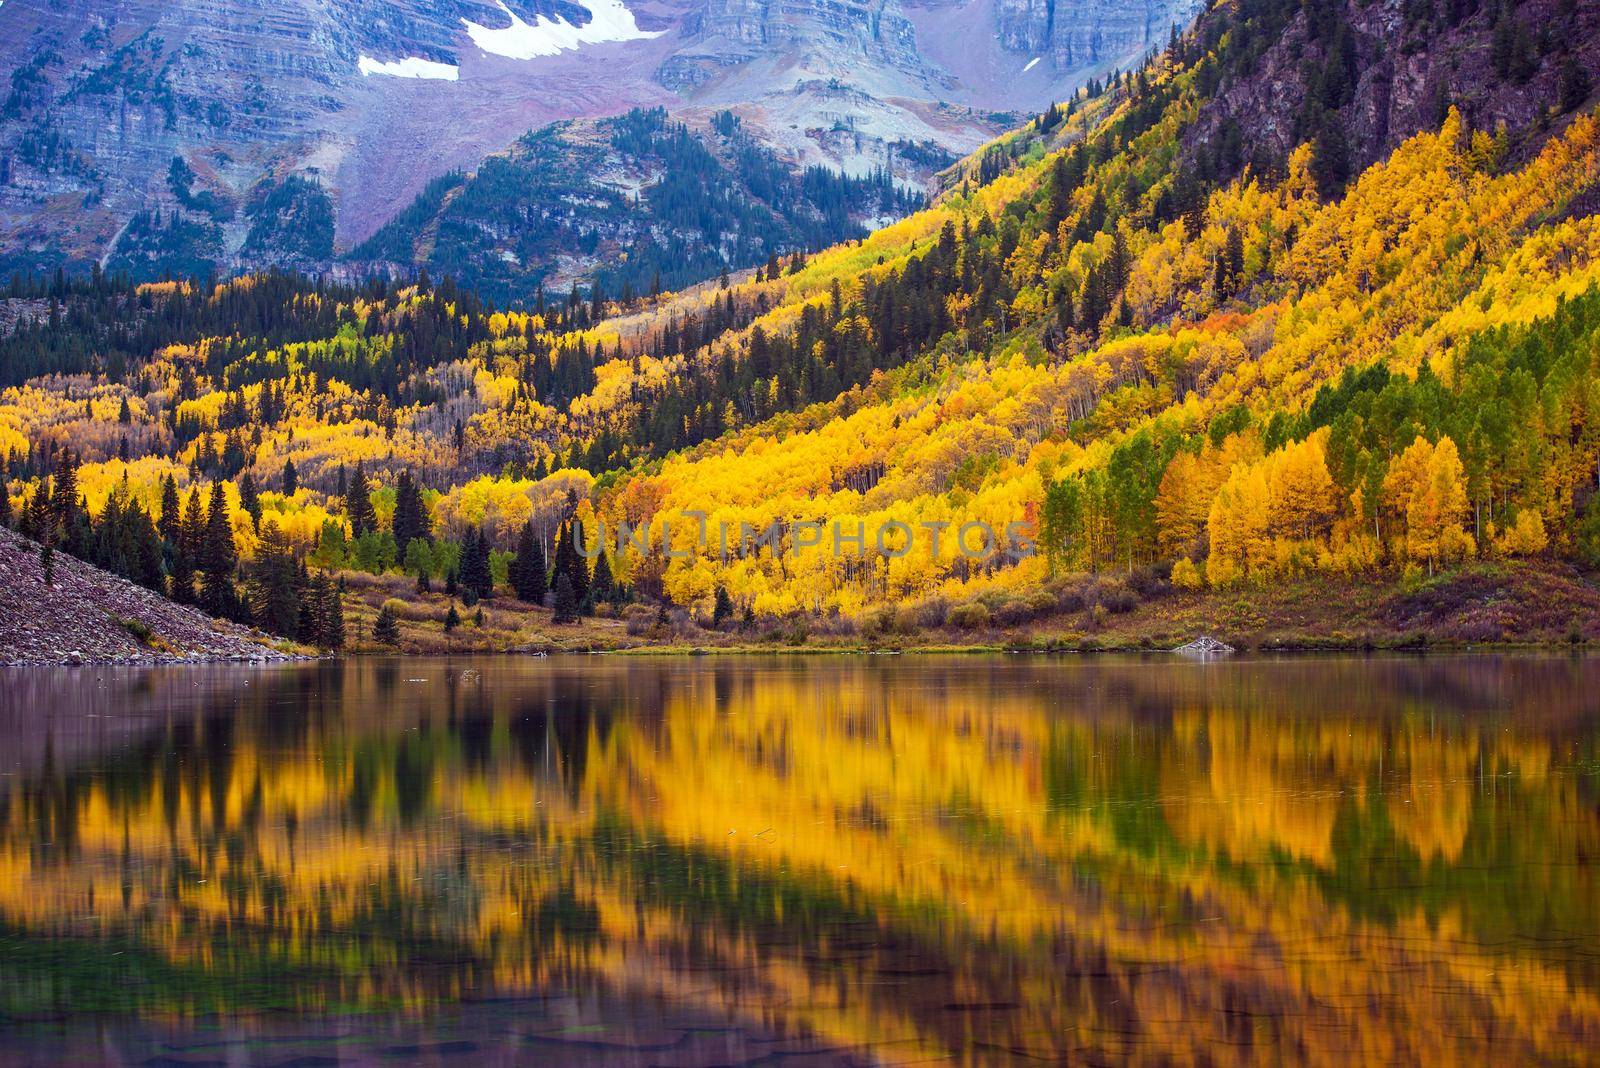 Fall in the Colorado, Maroon Lake and Colorful Forest. Yellow Aspen Trees. Aspen, Colorado, USA. by welcomia